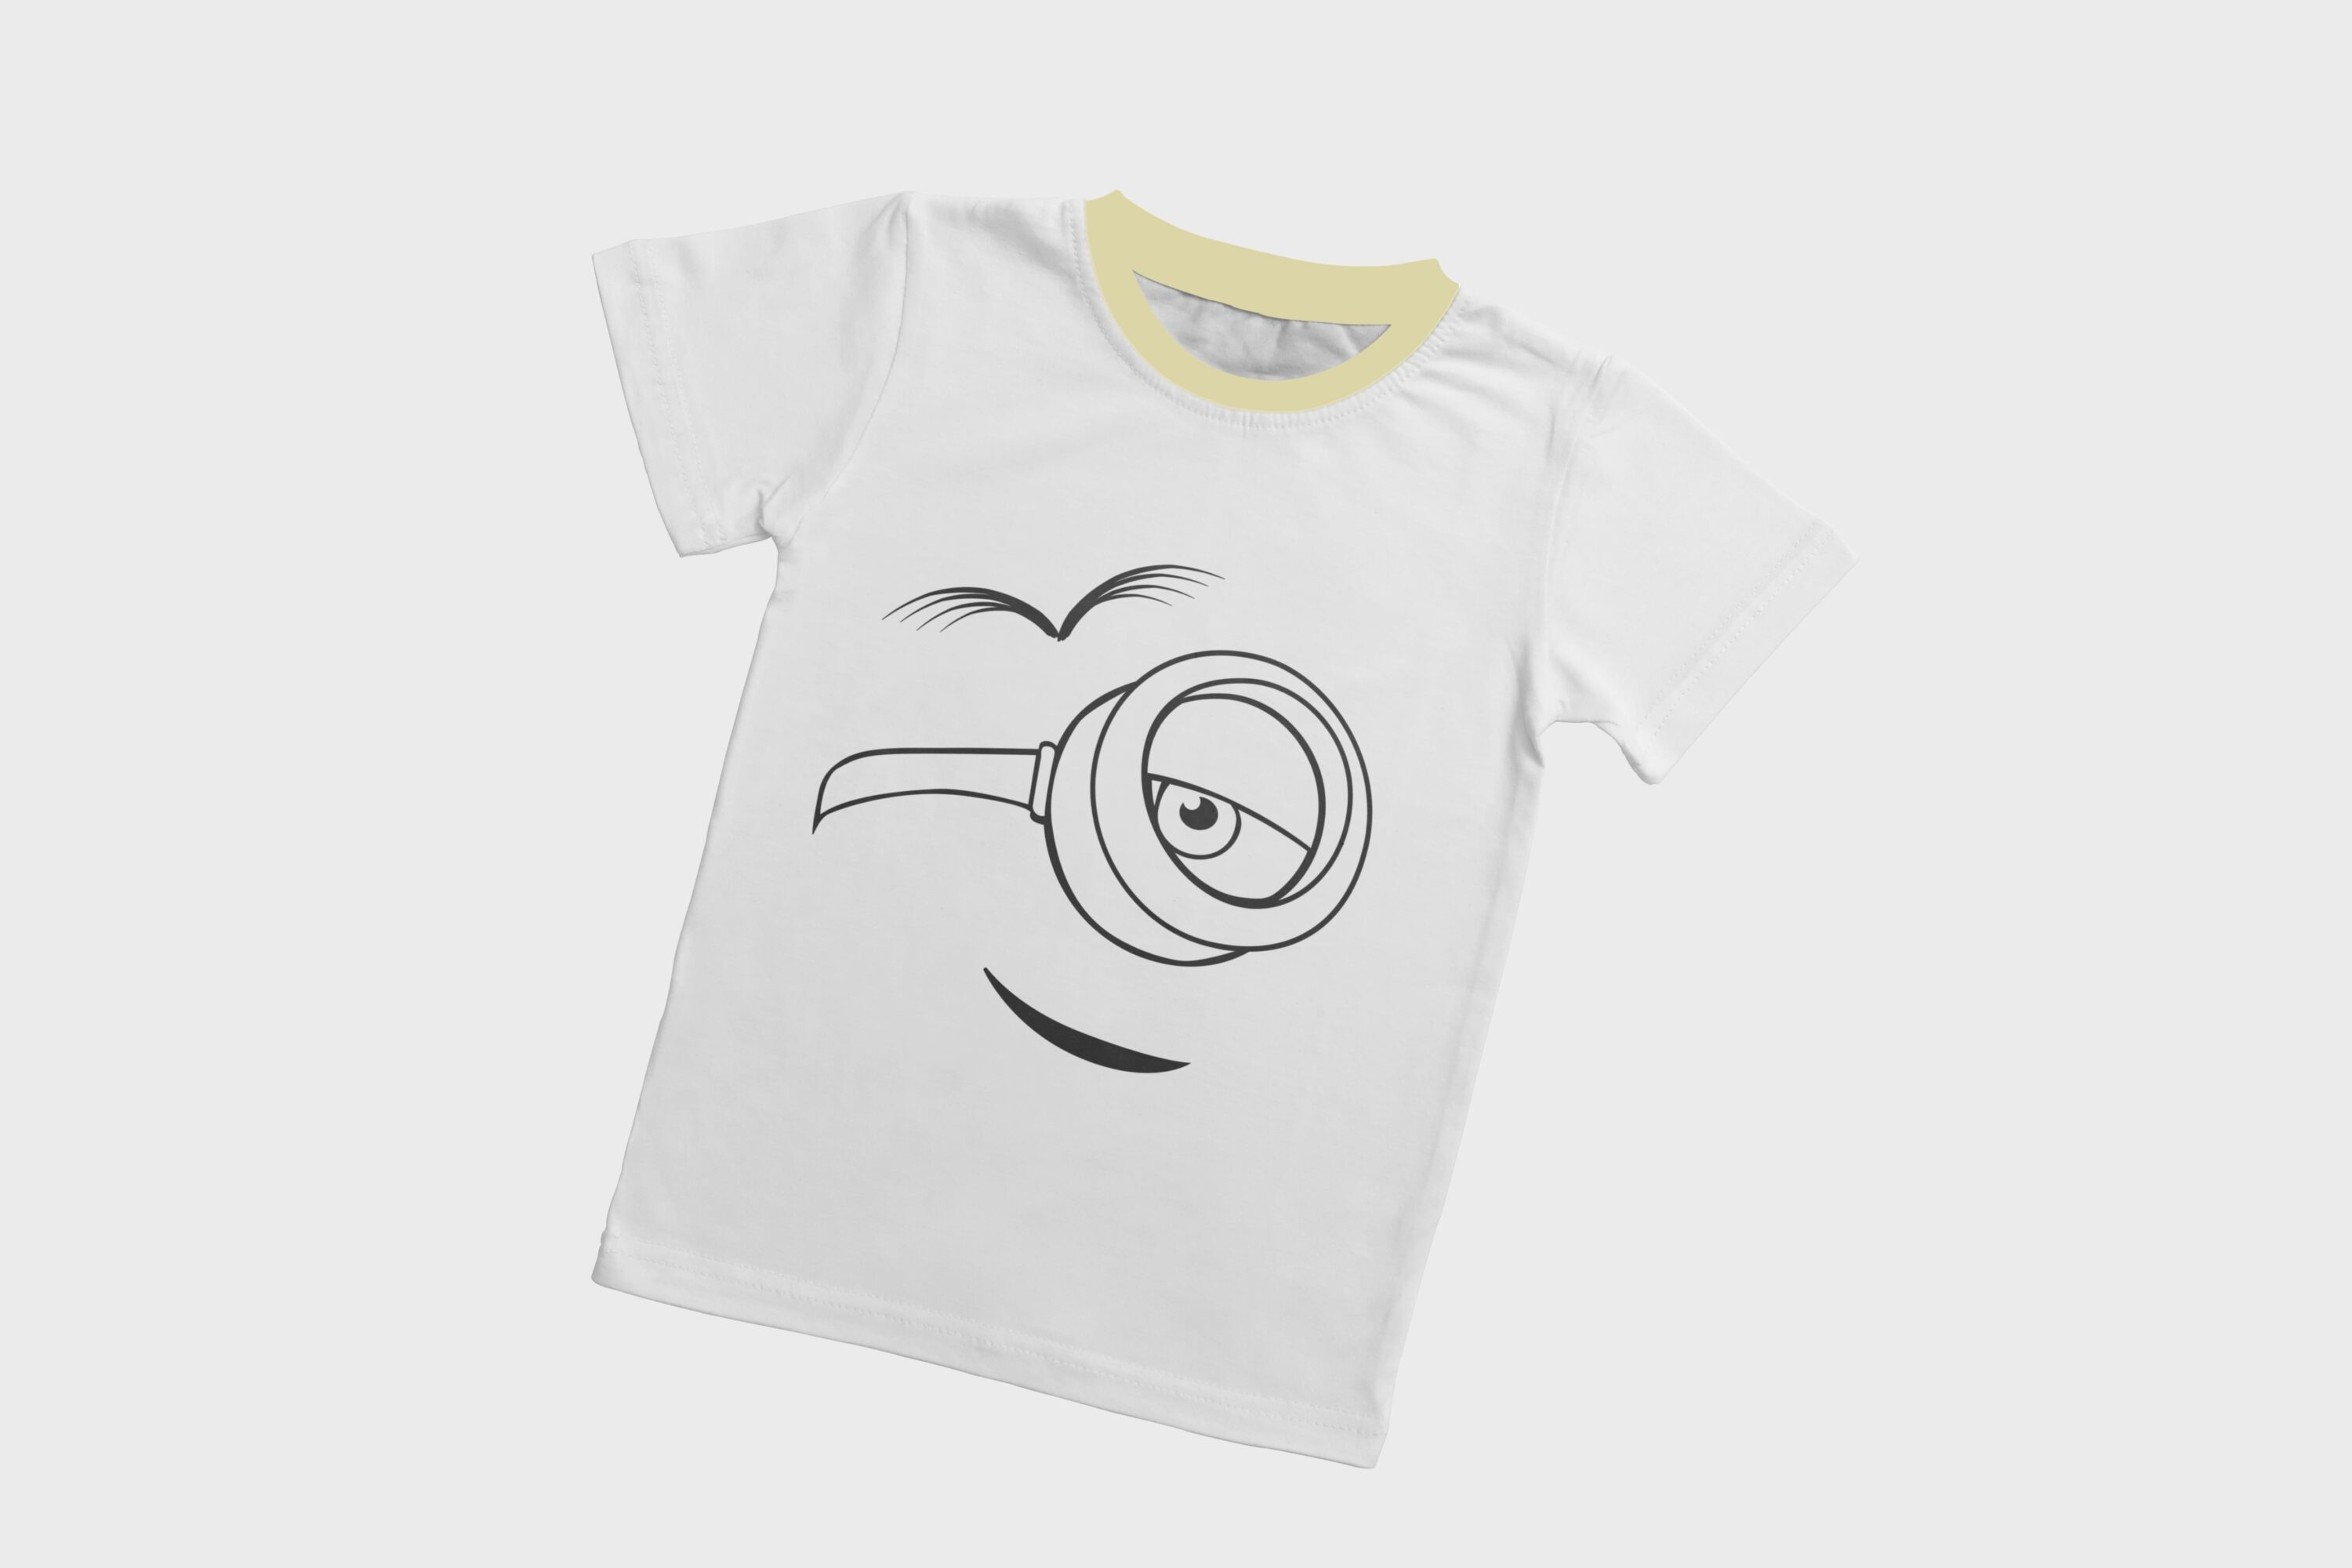 A white T-shirt with a dirty yellow collar and a silhouette face of a grinning minion.